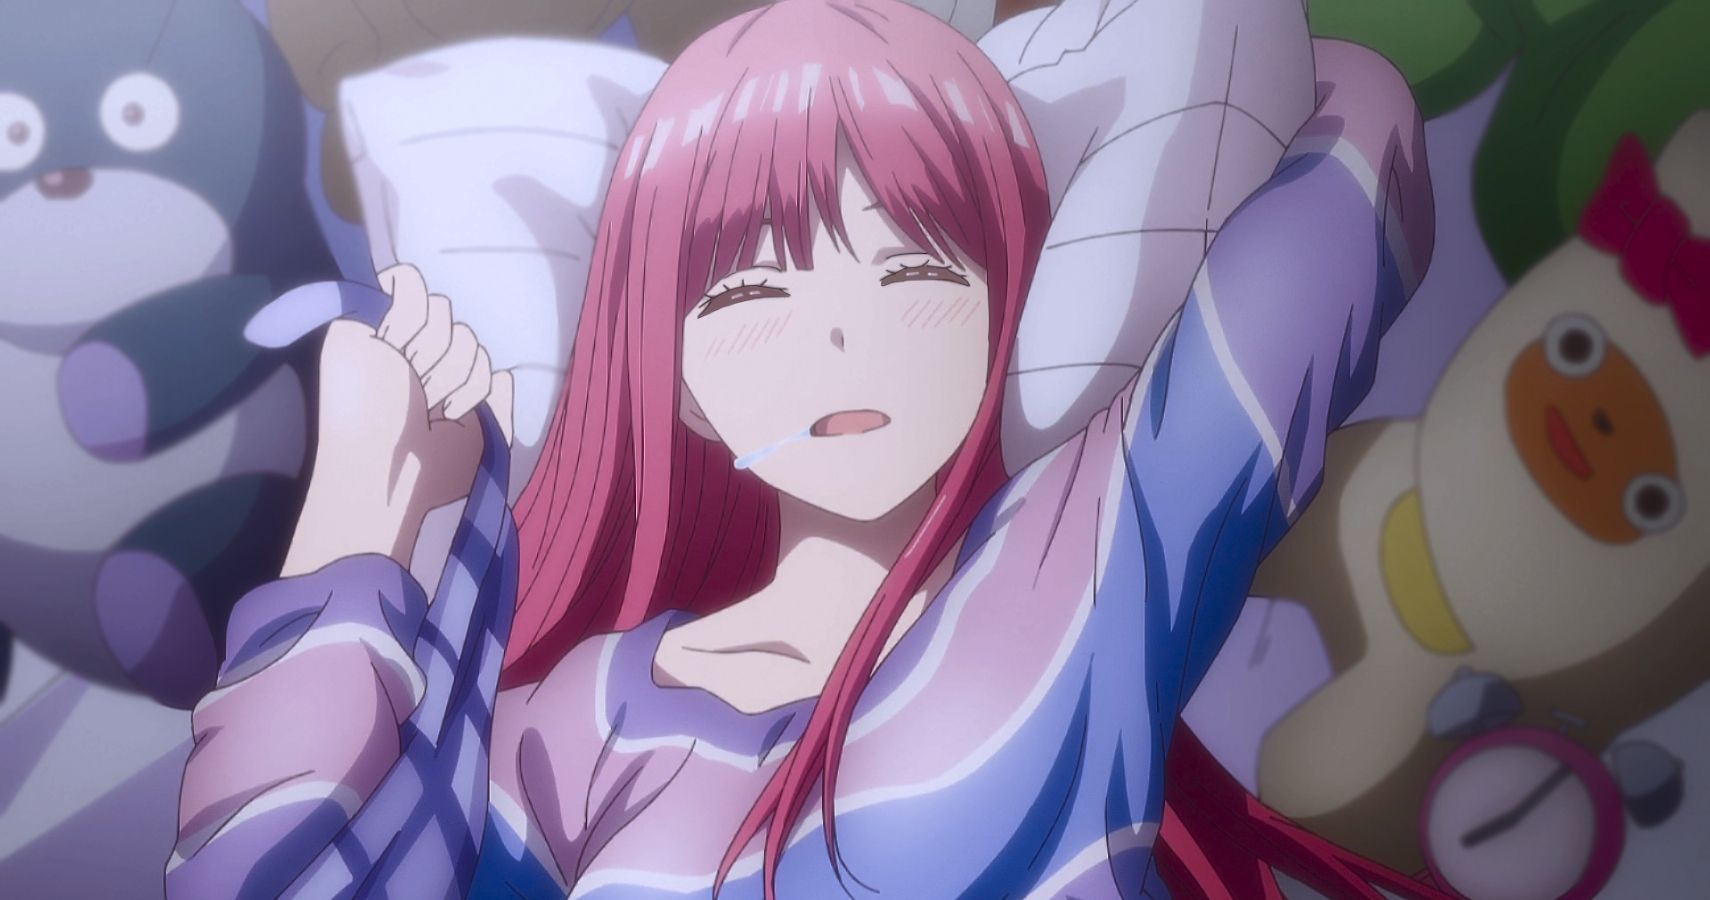 The Quintessential Quintuplets A Day Off (TV Episode 2019) - IMDb